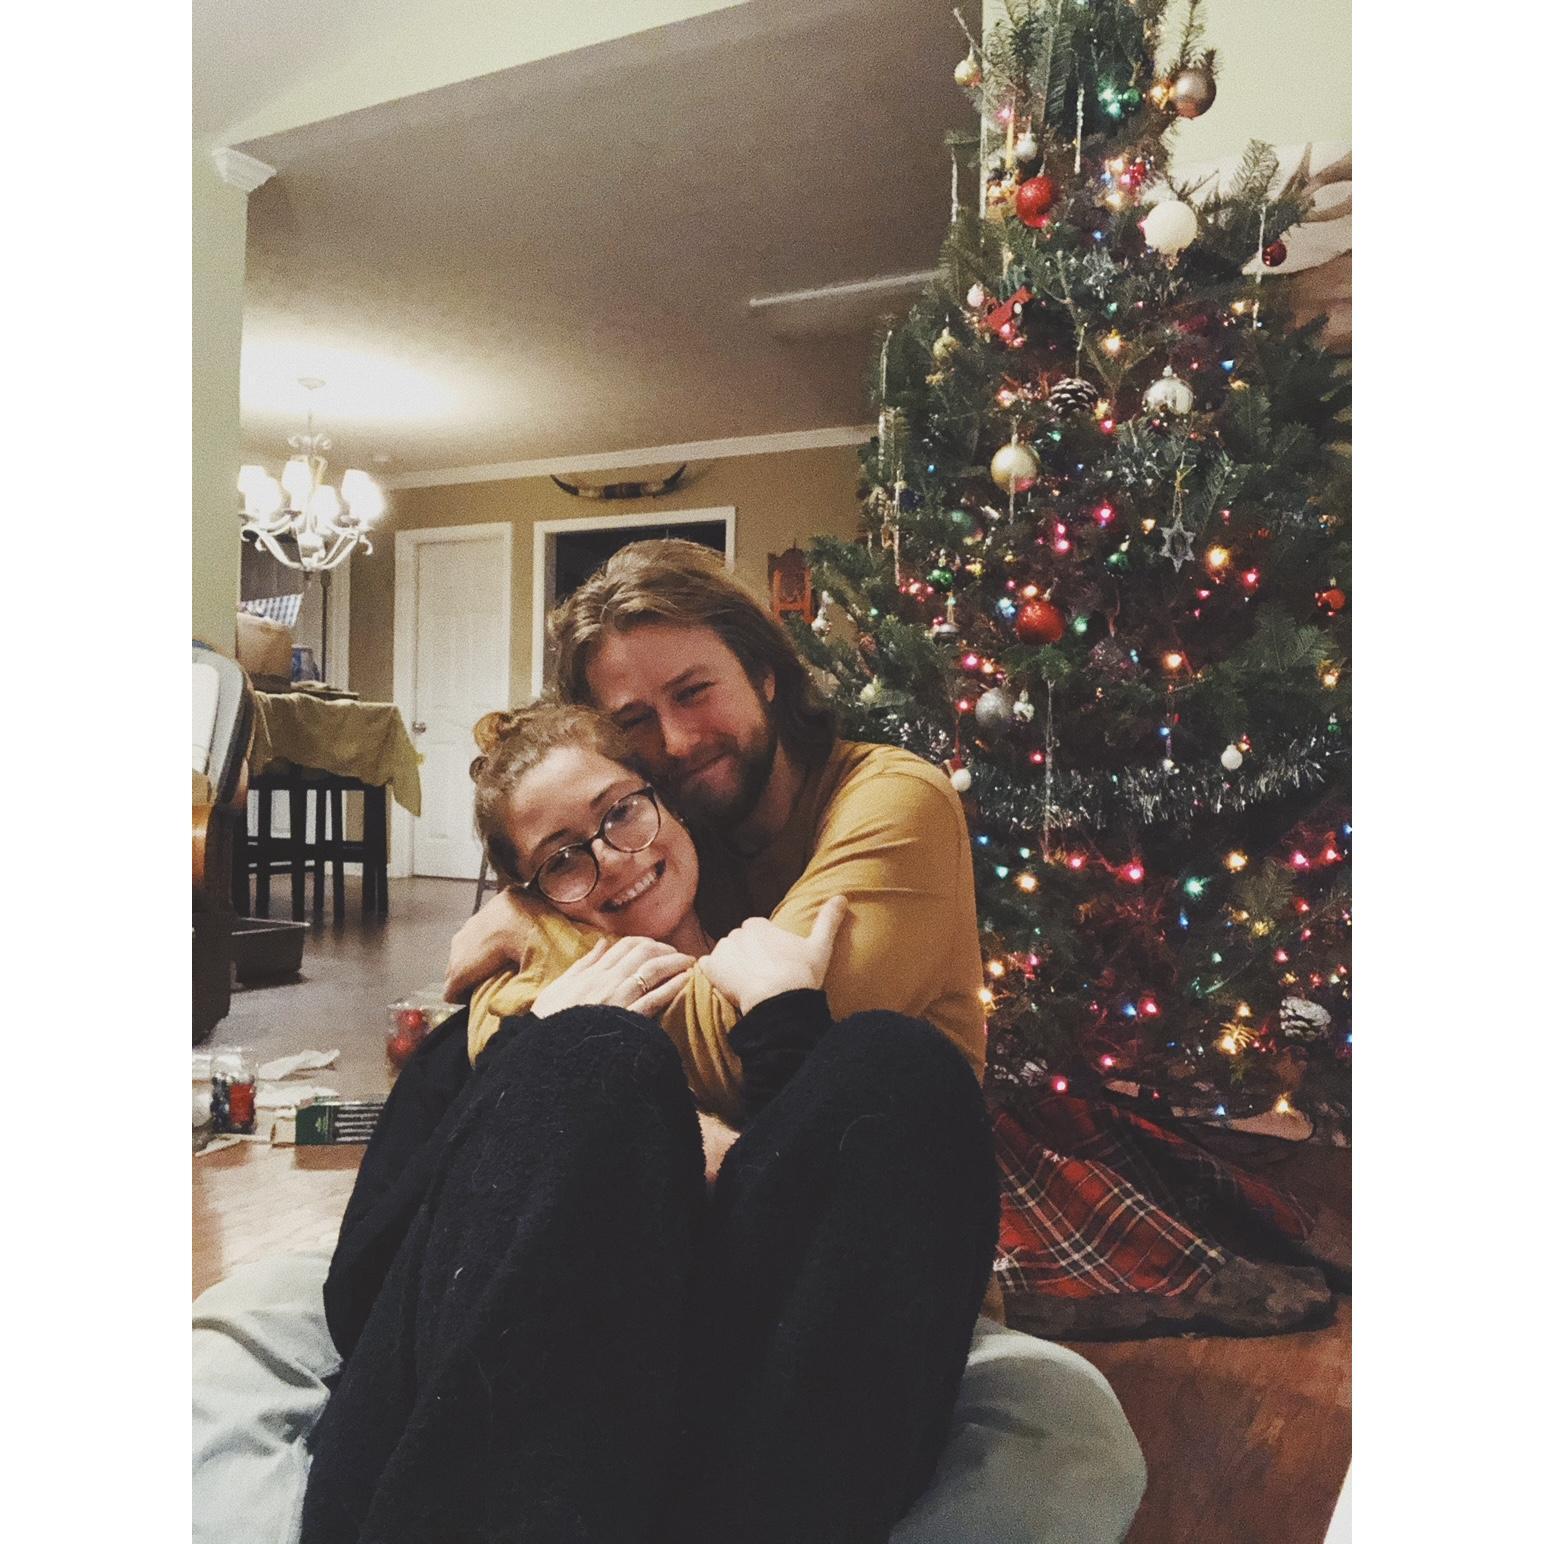 Our first Christmas together! 2020